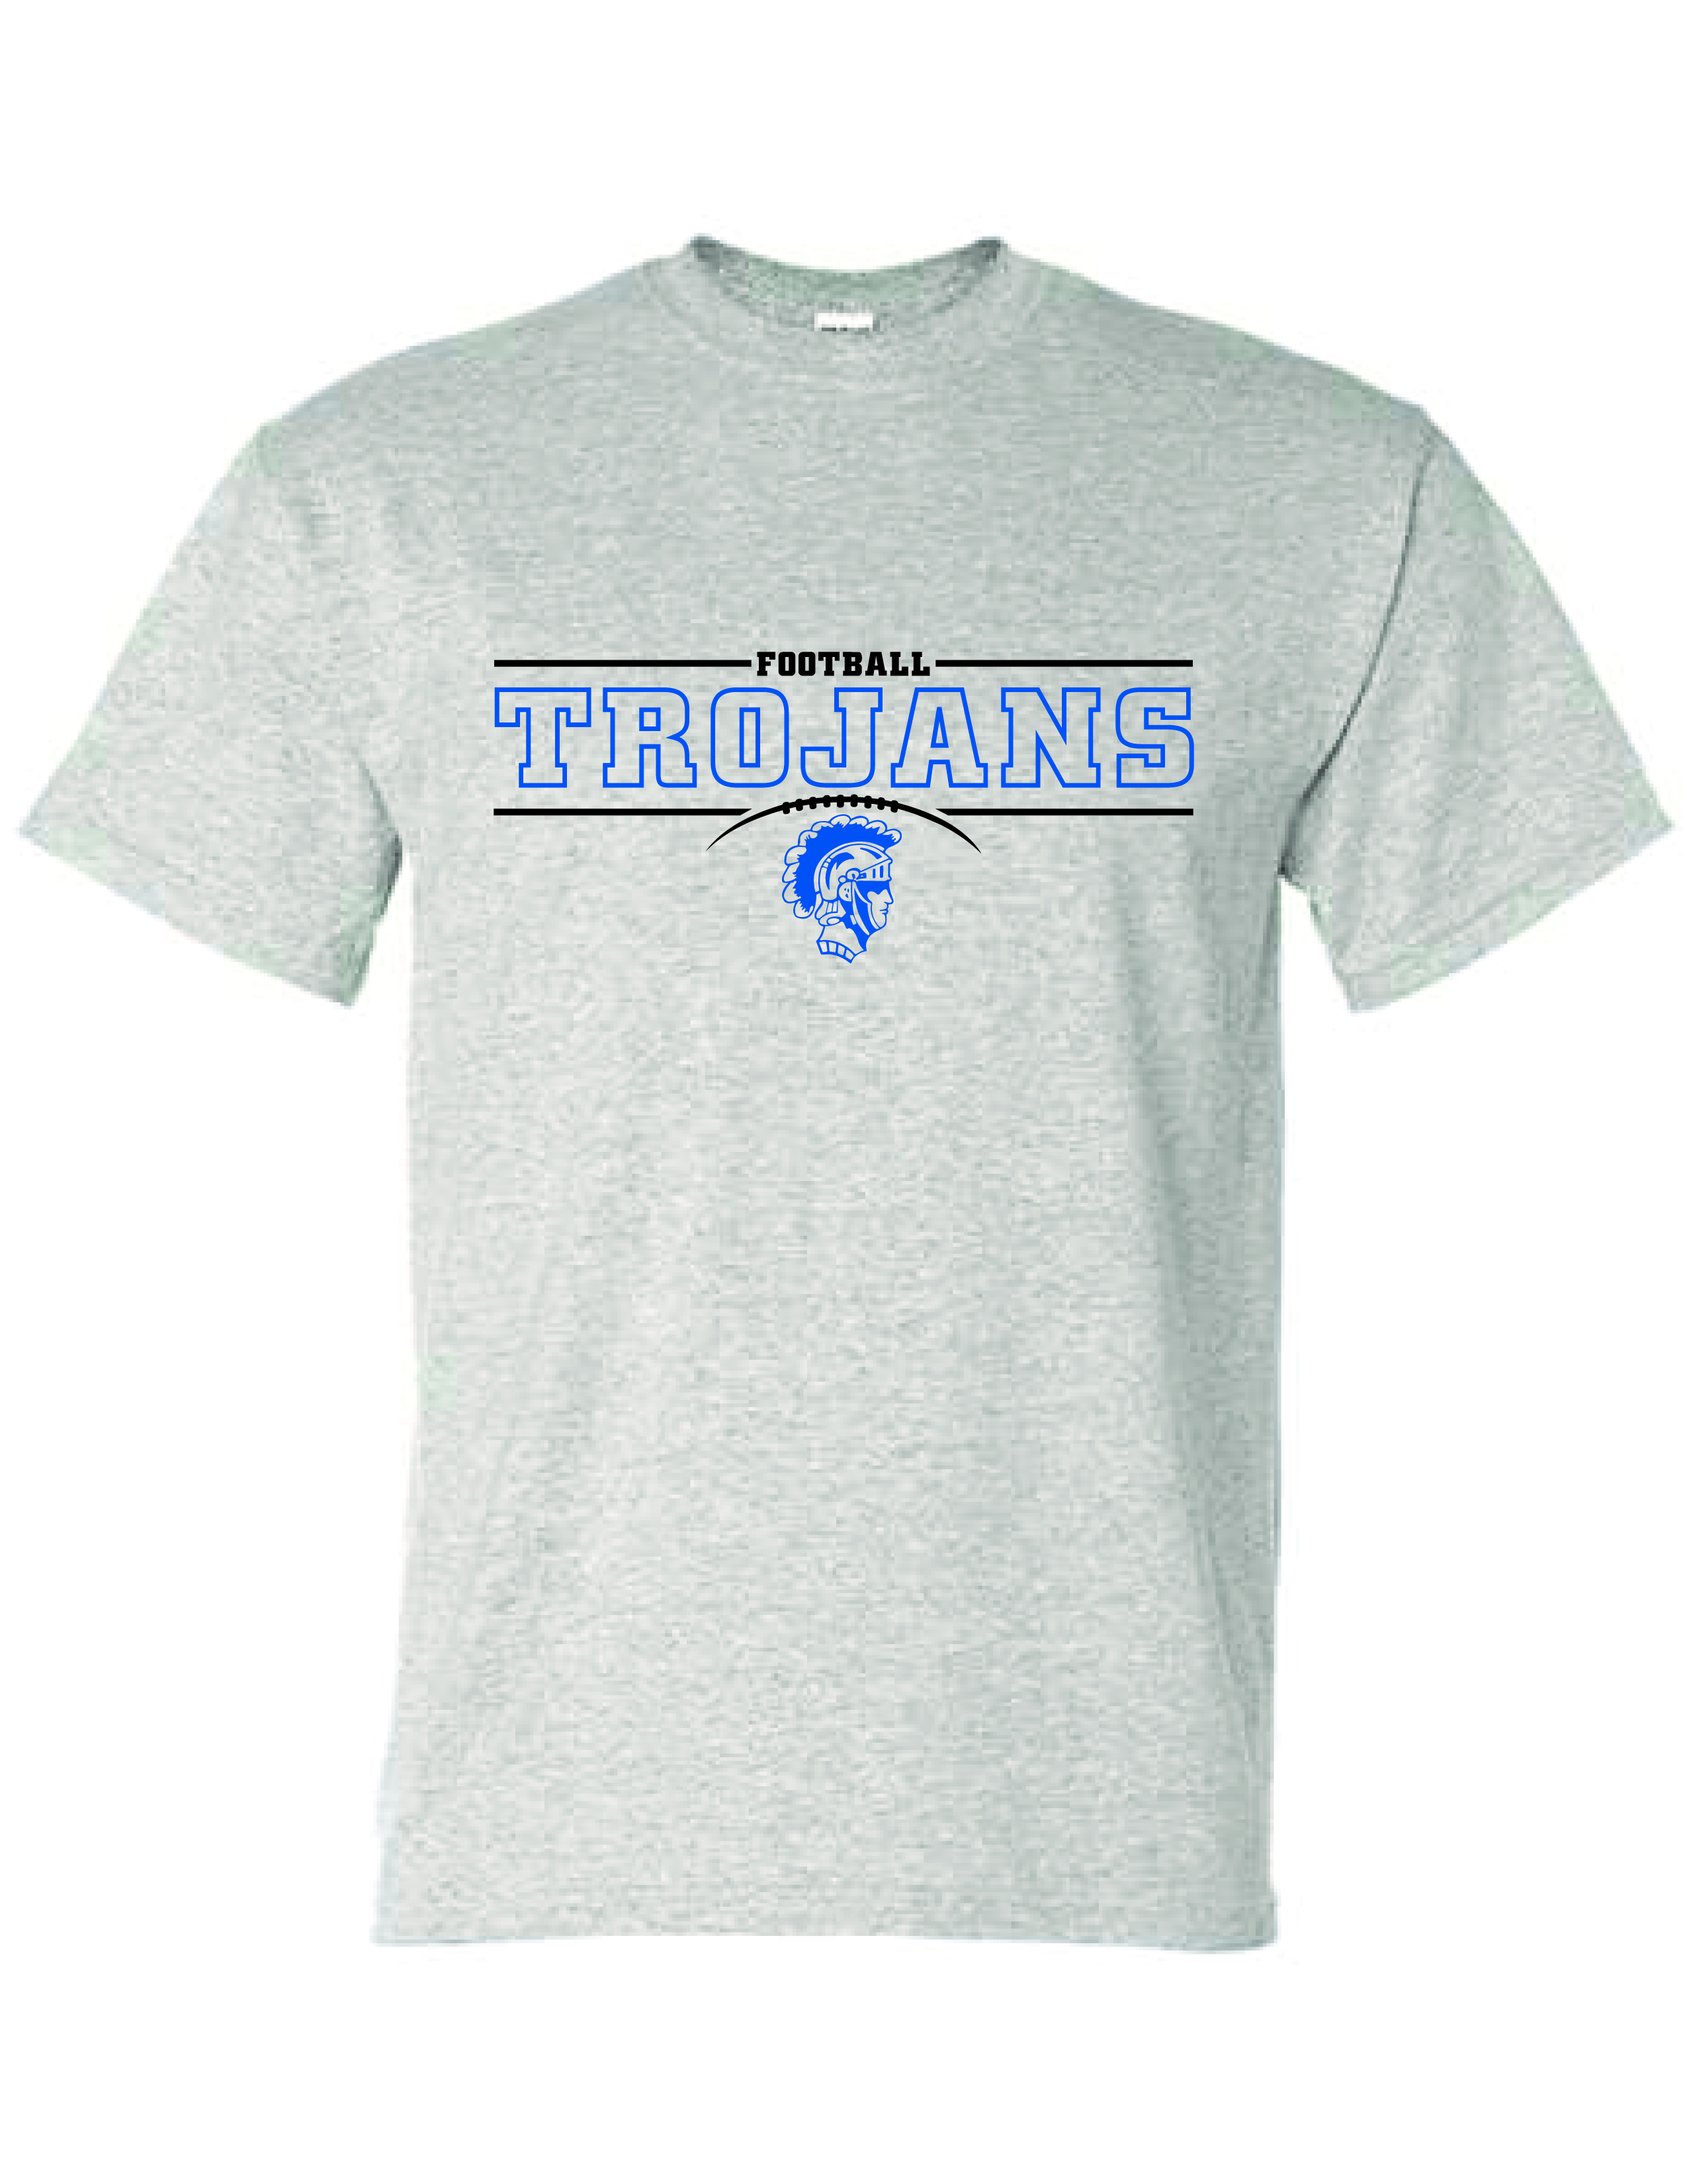 TROJAN SHORT SLEEVE FOOTBALL (Men's and Youth sizes)